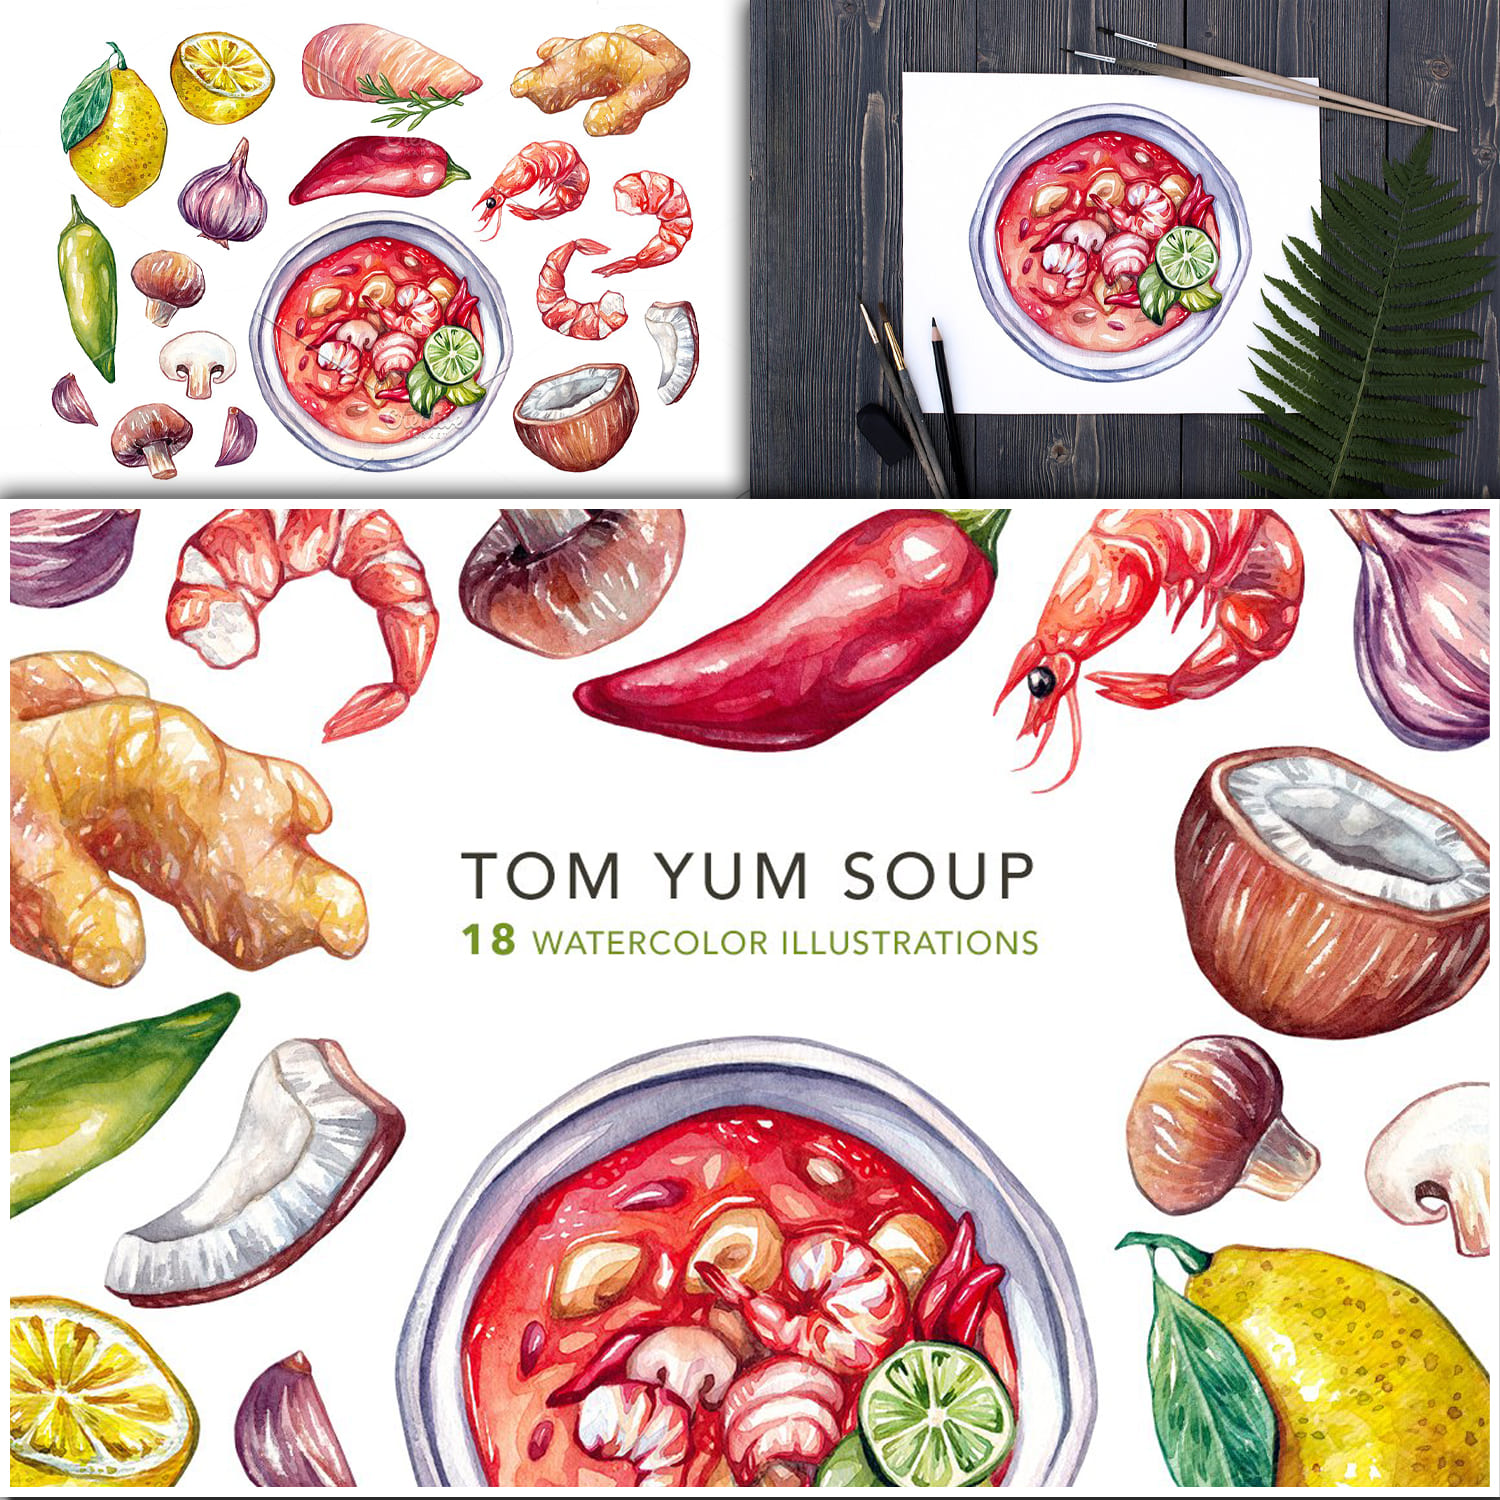 Tom Yum Soup + Ingredients cover.